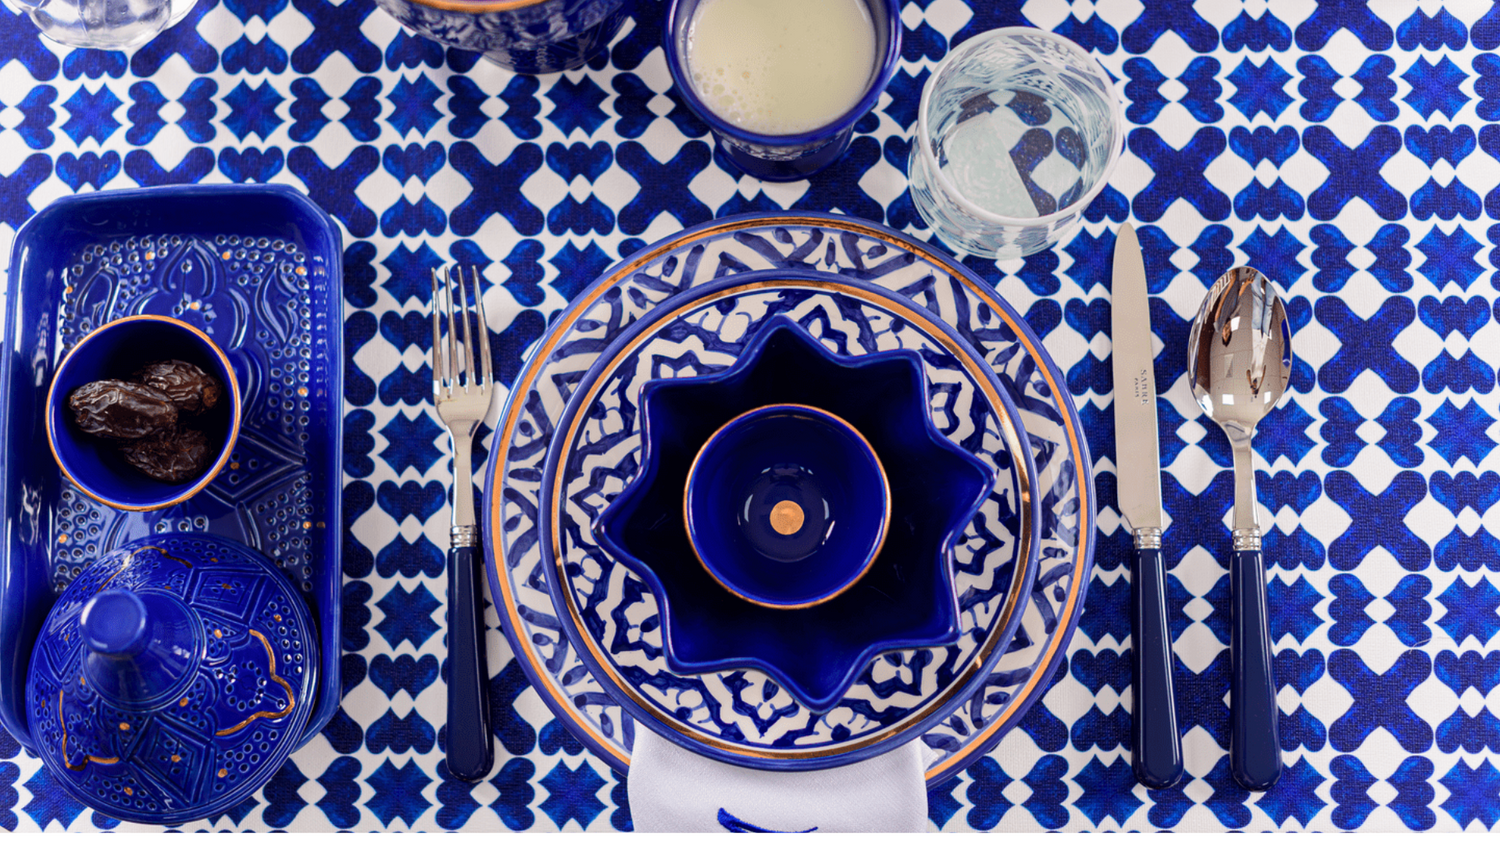 A blue and white ceramic table setting with plates, bowls, and cutlery, ideal for weddings, dinner parties, and special occasions.